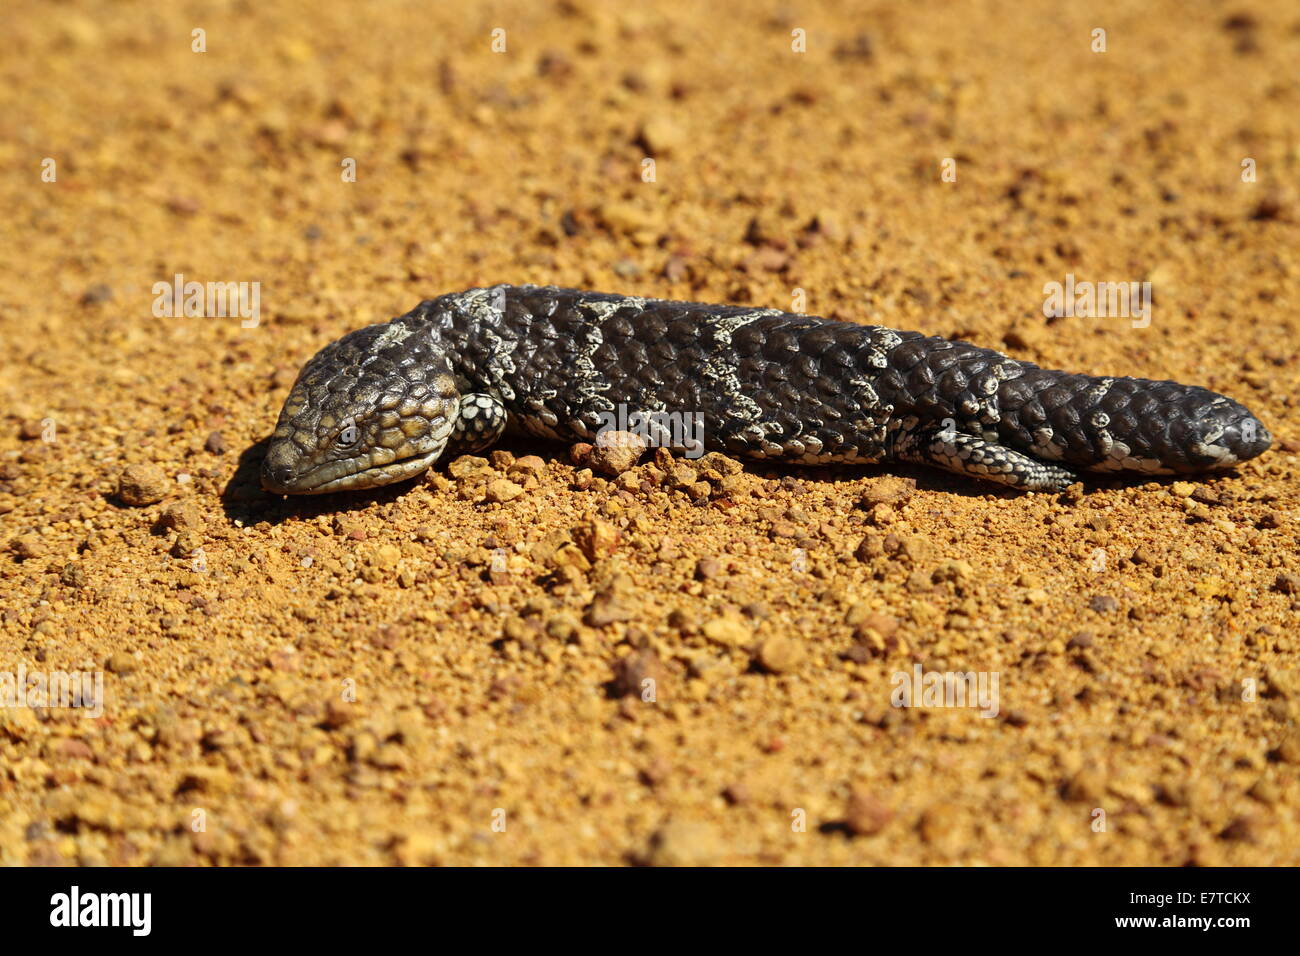 A Blue-tongued Skink (commonly called blue-tongued lizard) basks on a rural road near Hyden, Western Australia, Australia. Stock Photo